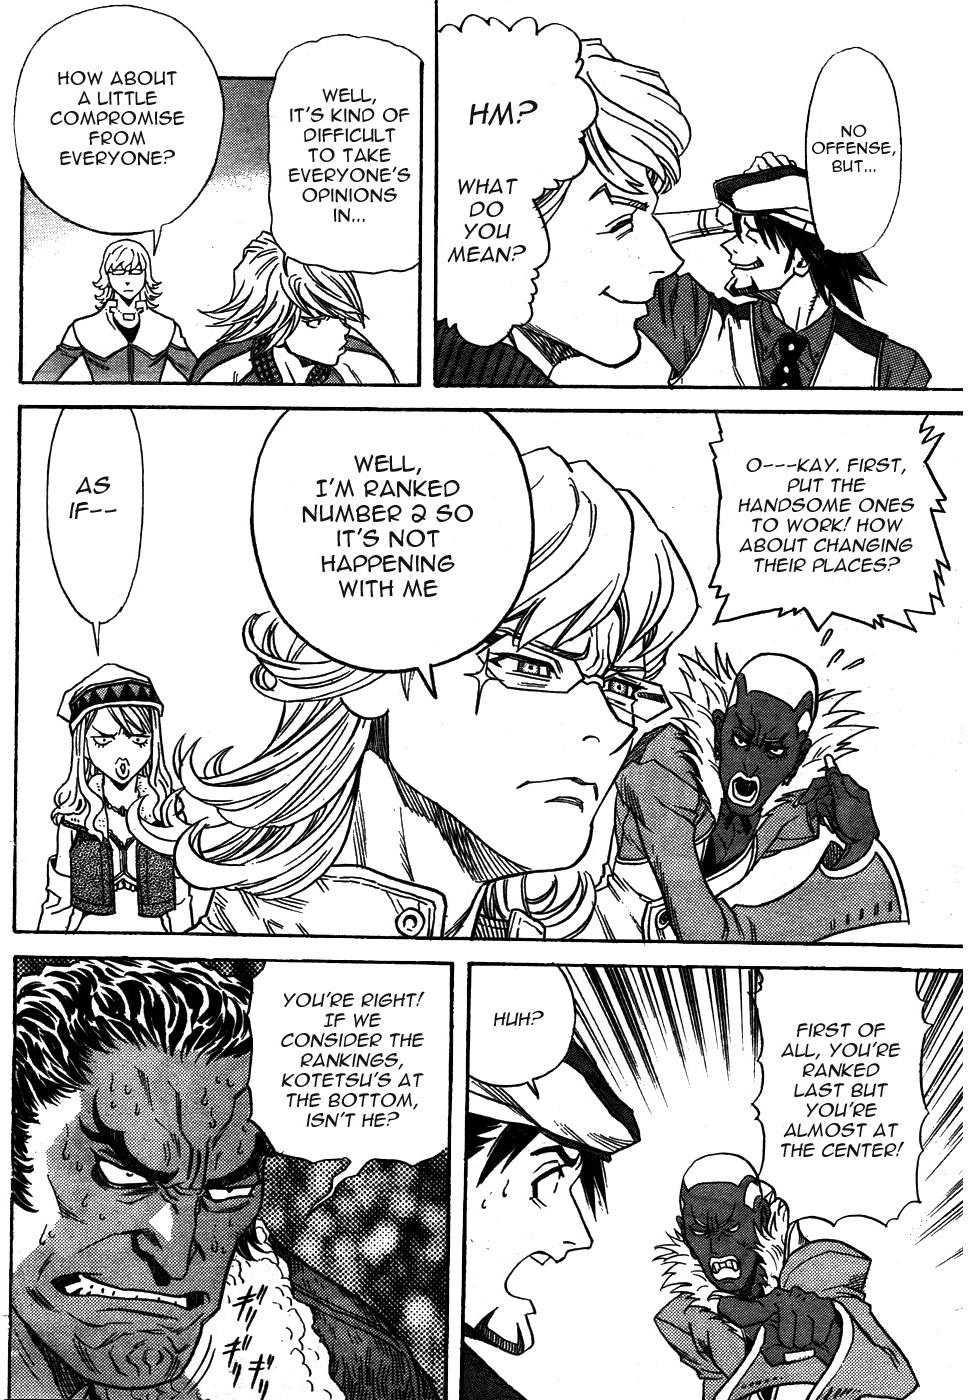 Tiger & Bunny Good luck and bad luck alternate like the strands of a rope Ch. Oneshot